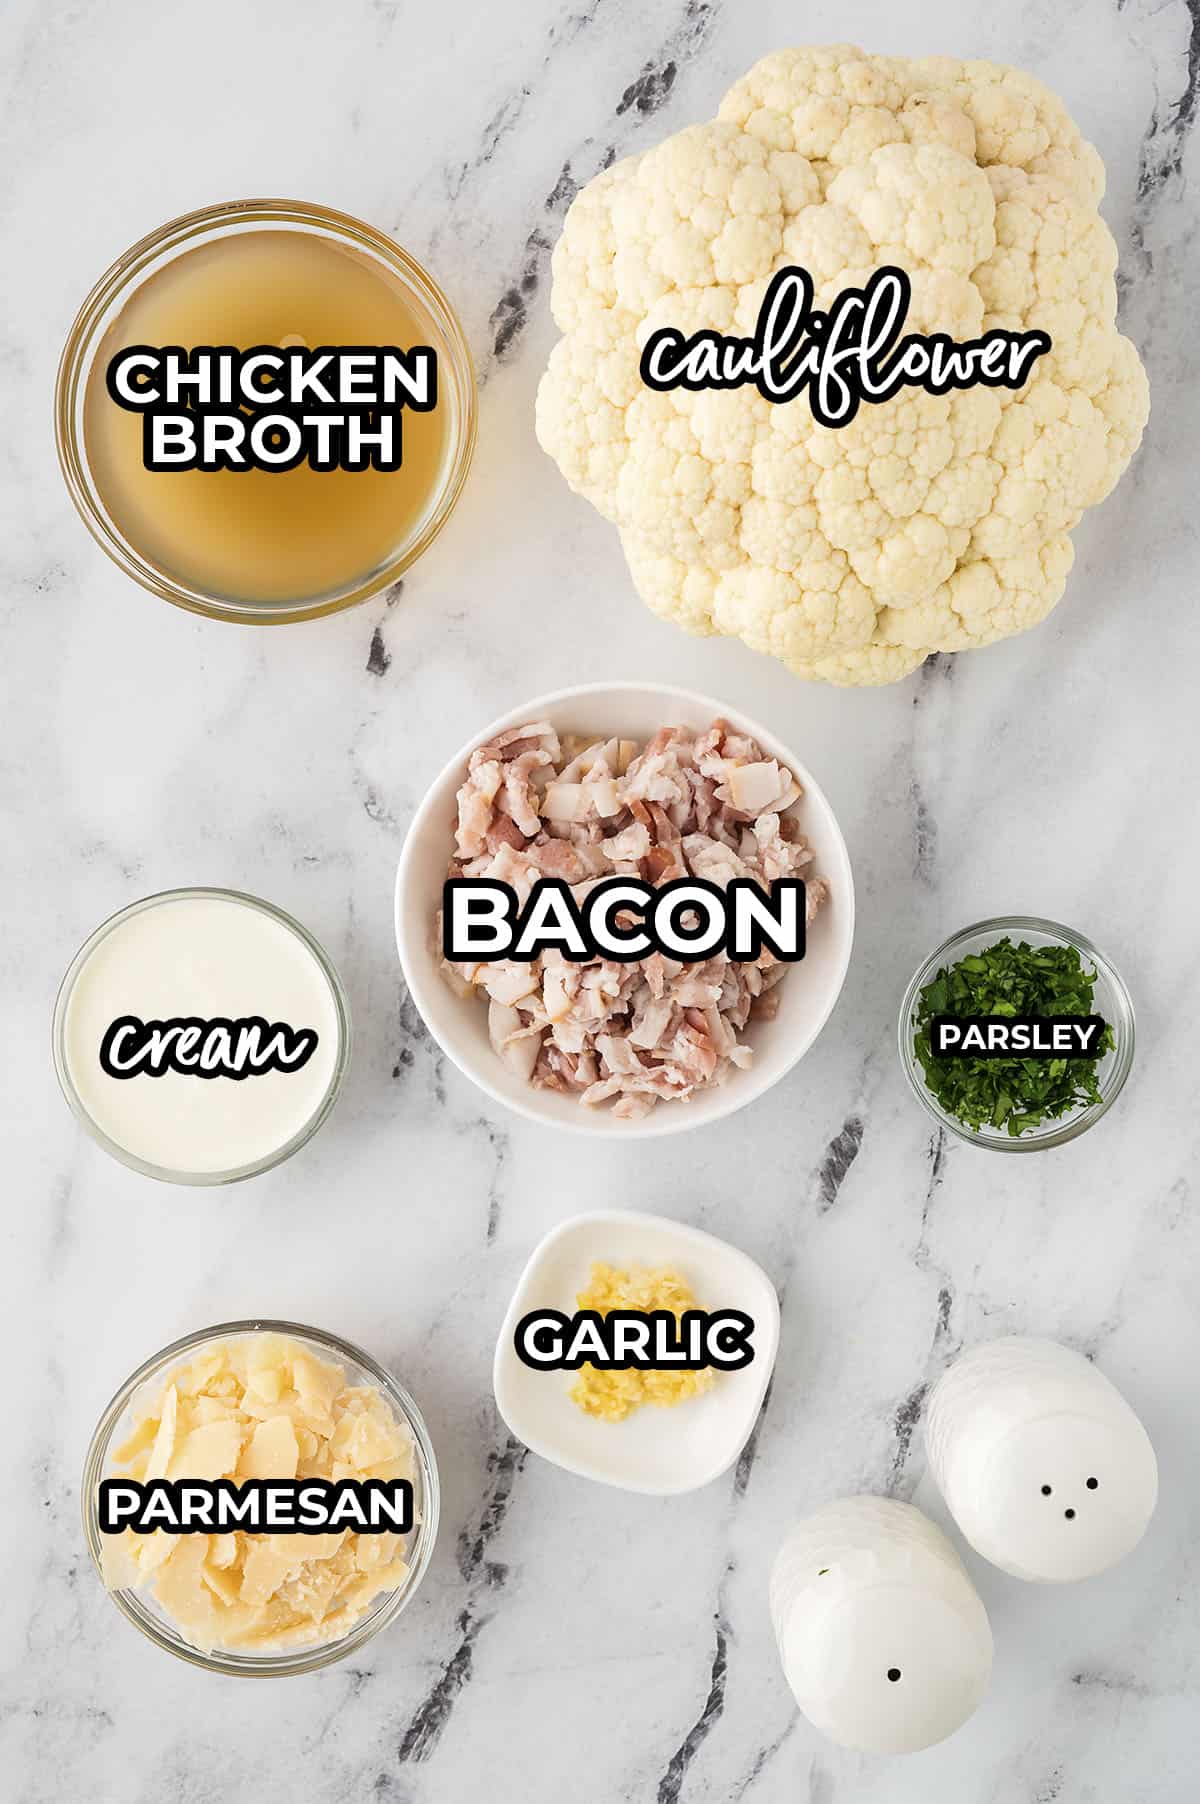 Ingredients for cauliflower risotto recipe.